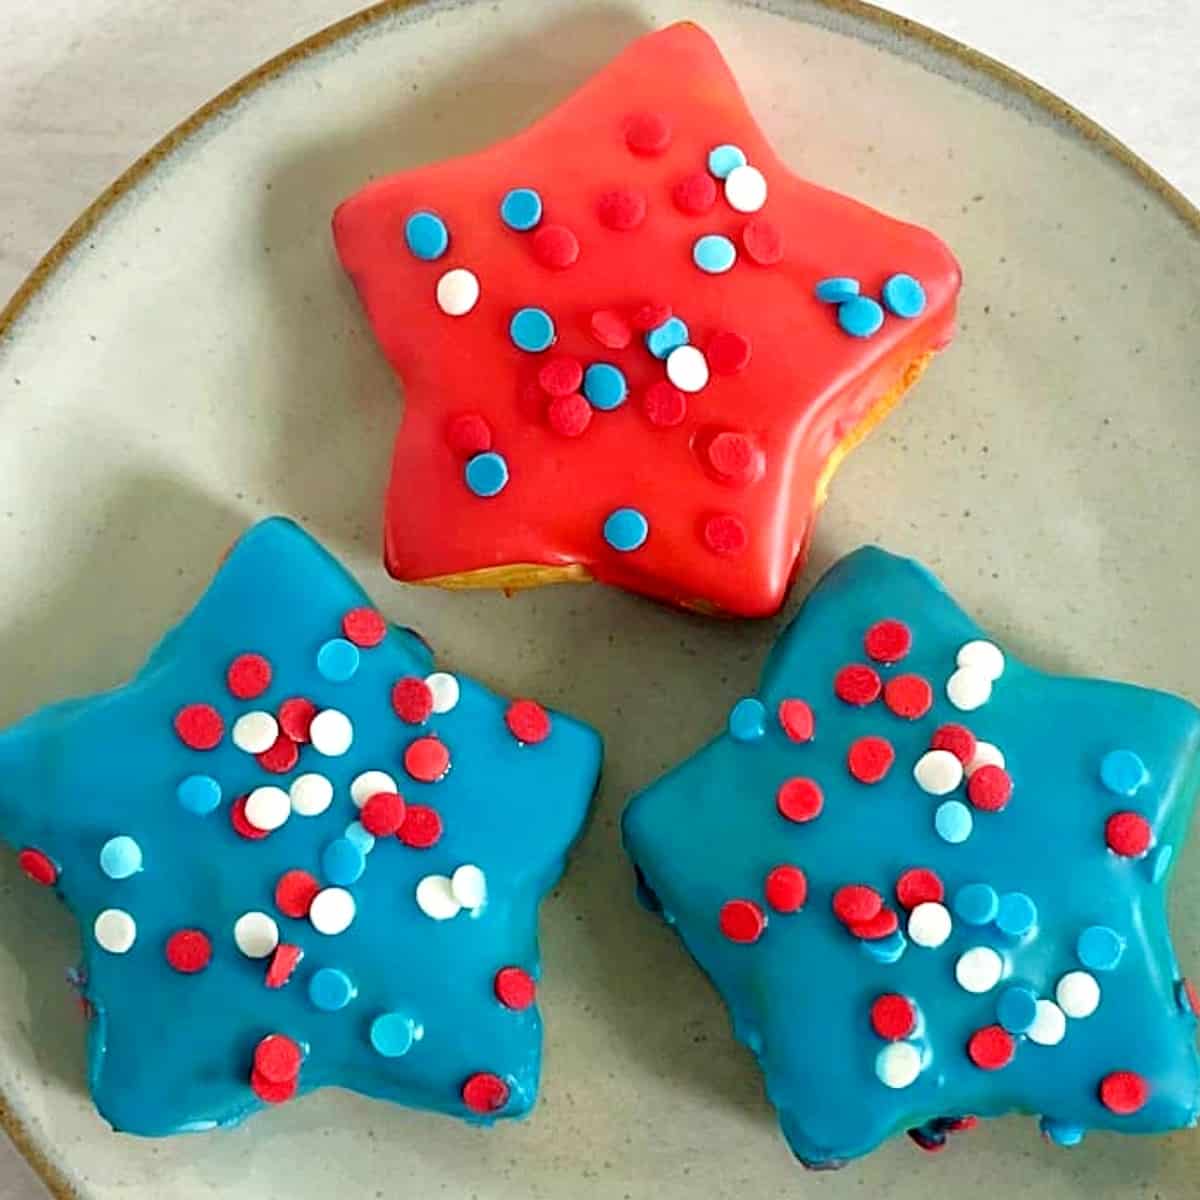 red, white, and blue star donuts on a plate.